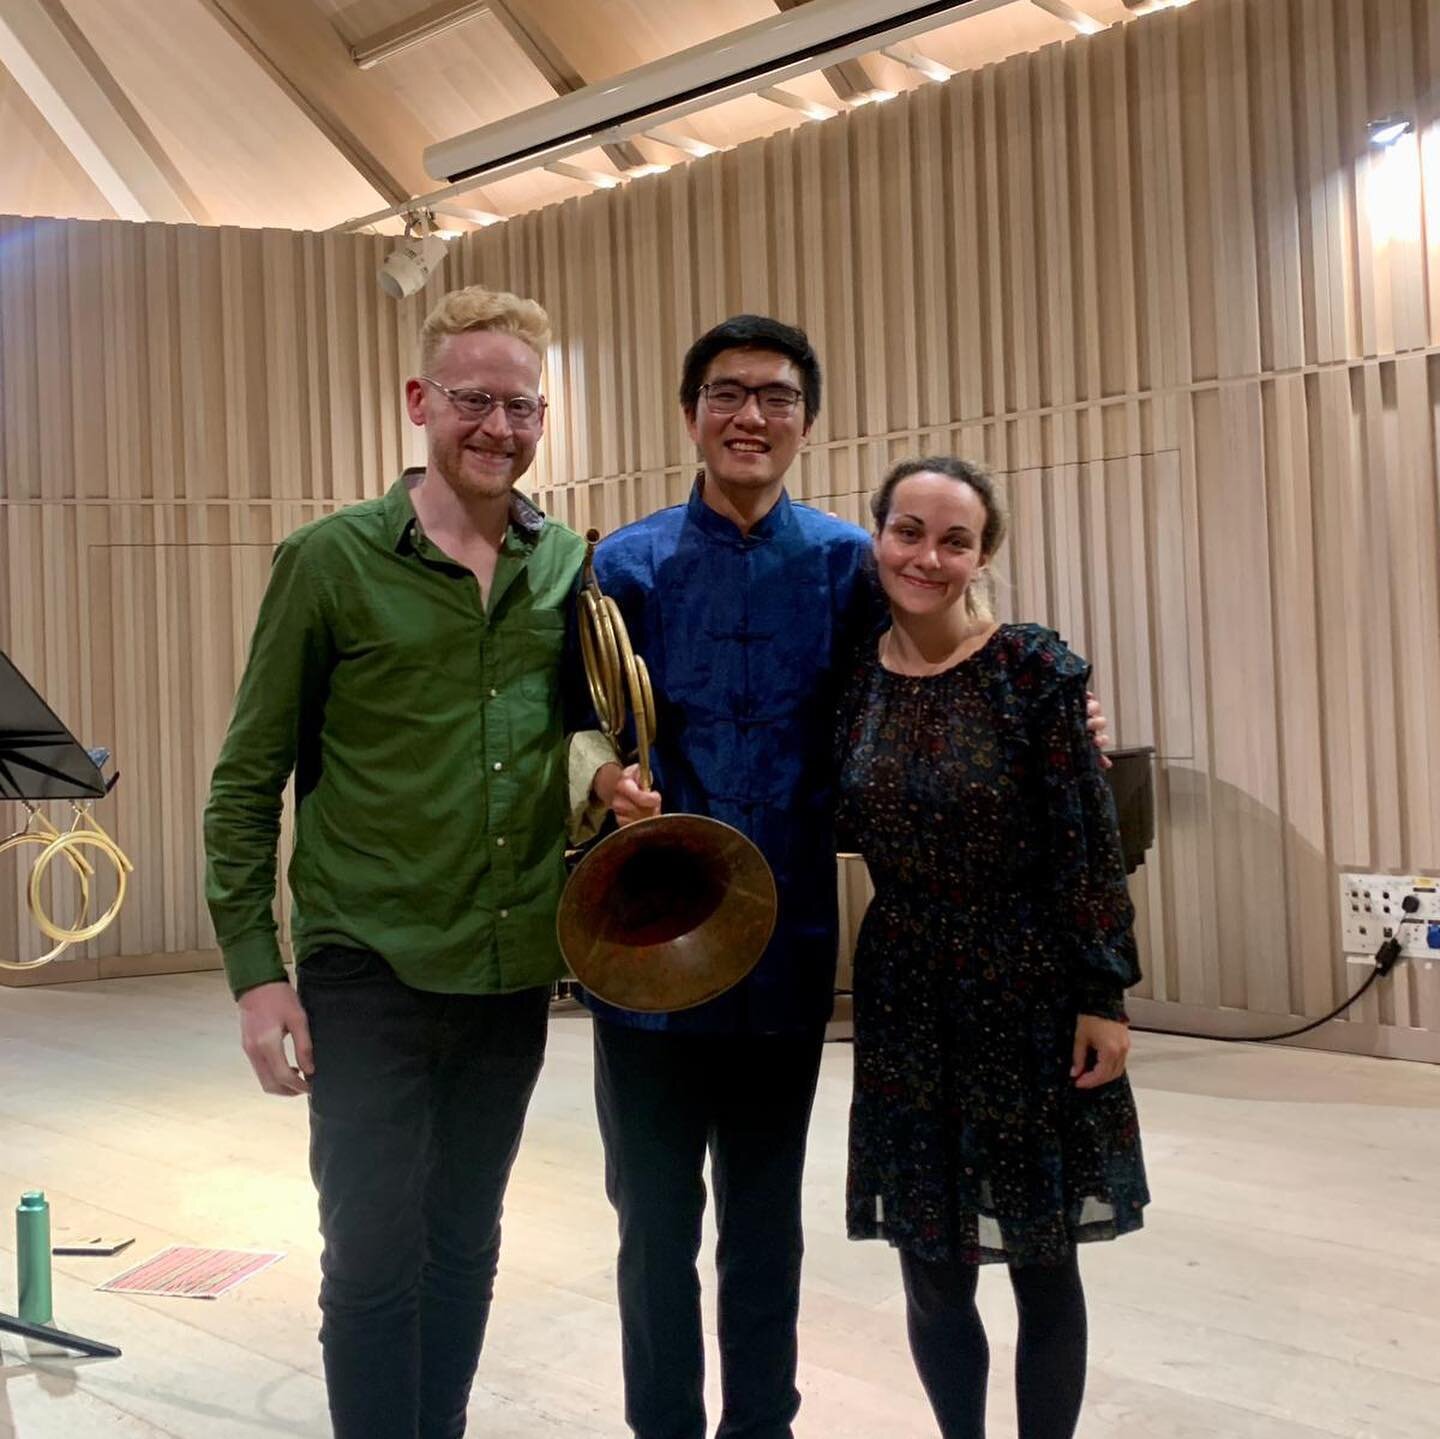 Truly humbled to hear @naturally_isaac play my new piece Sgraffito in his recital of music (both brand new and centuries old) for natural horn at my alma mater @royalacademyofmusic this evening 🥹 

Thanks Isaac for your wonderful performance and tir